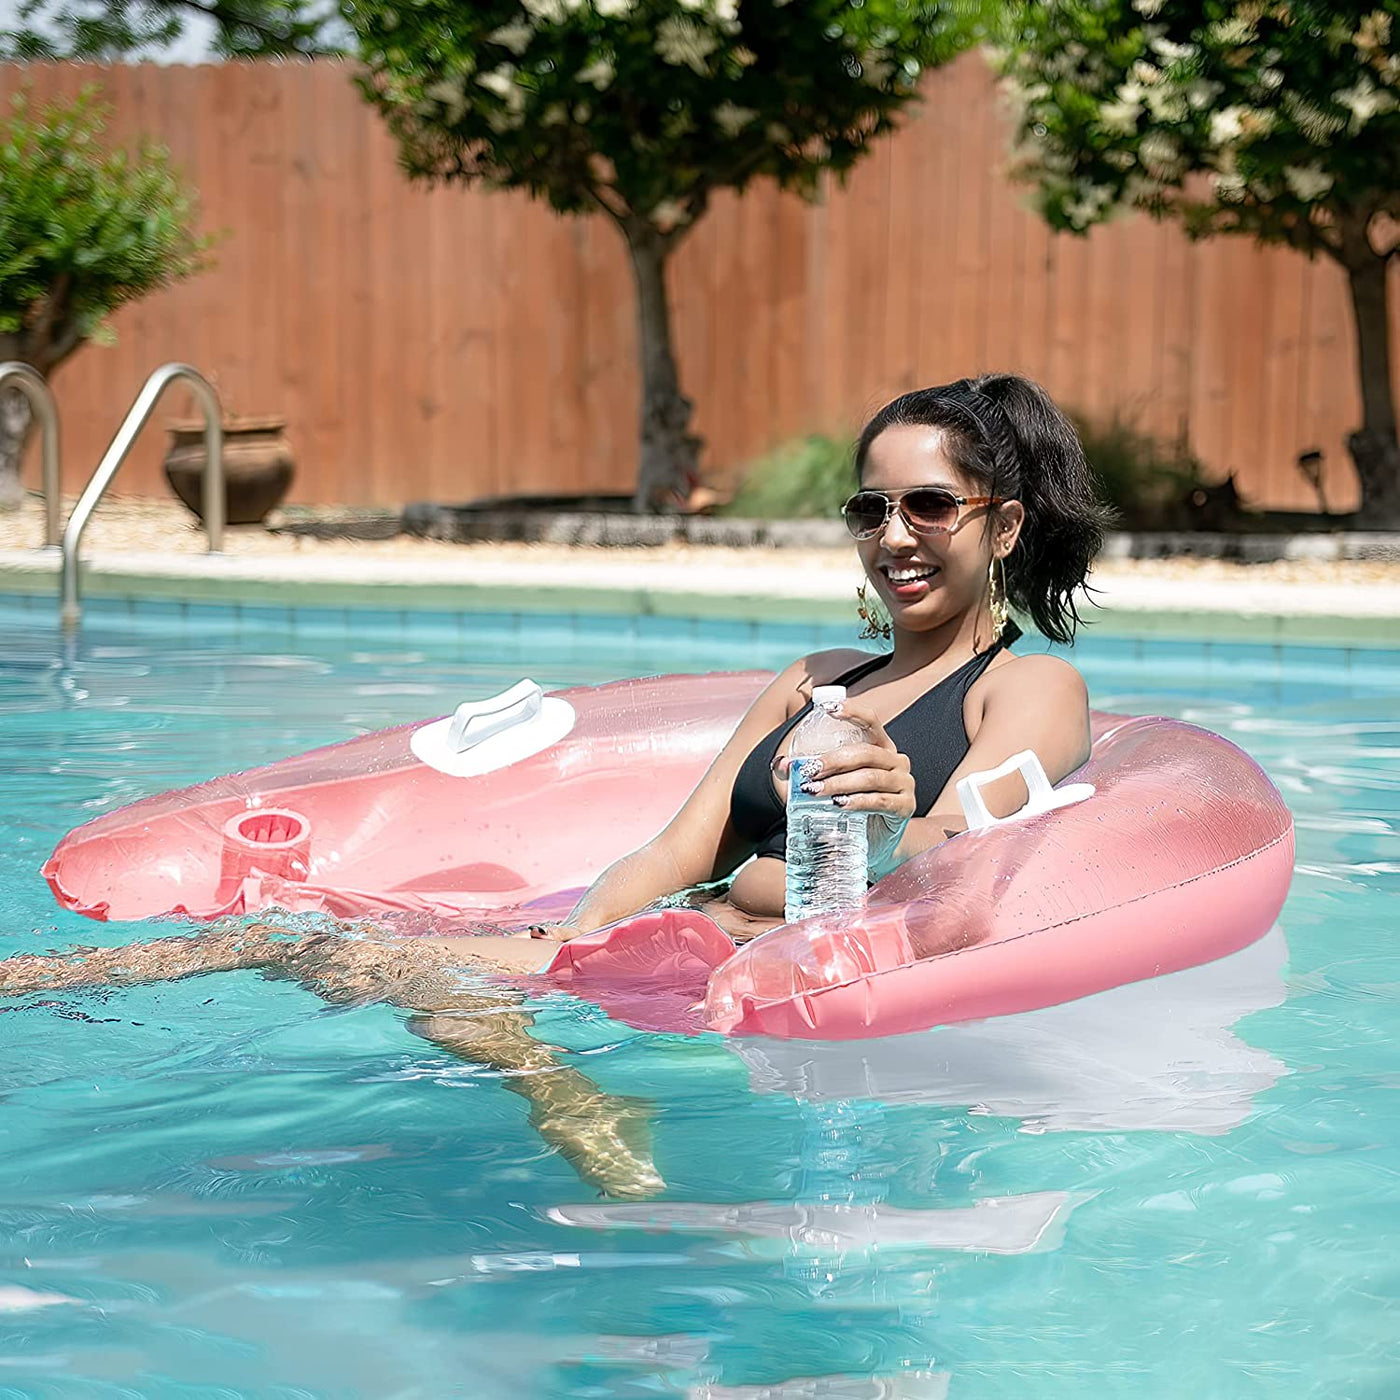 Inflatable Pool Chair (2 Pack) Pool Floats Adult Size with Drink Holder - Lounger for Pool or Lake by 4E's Novelty